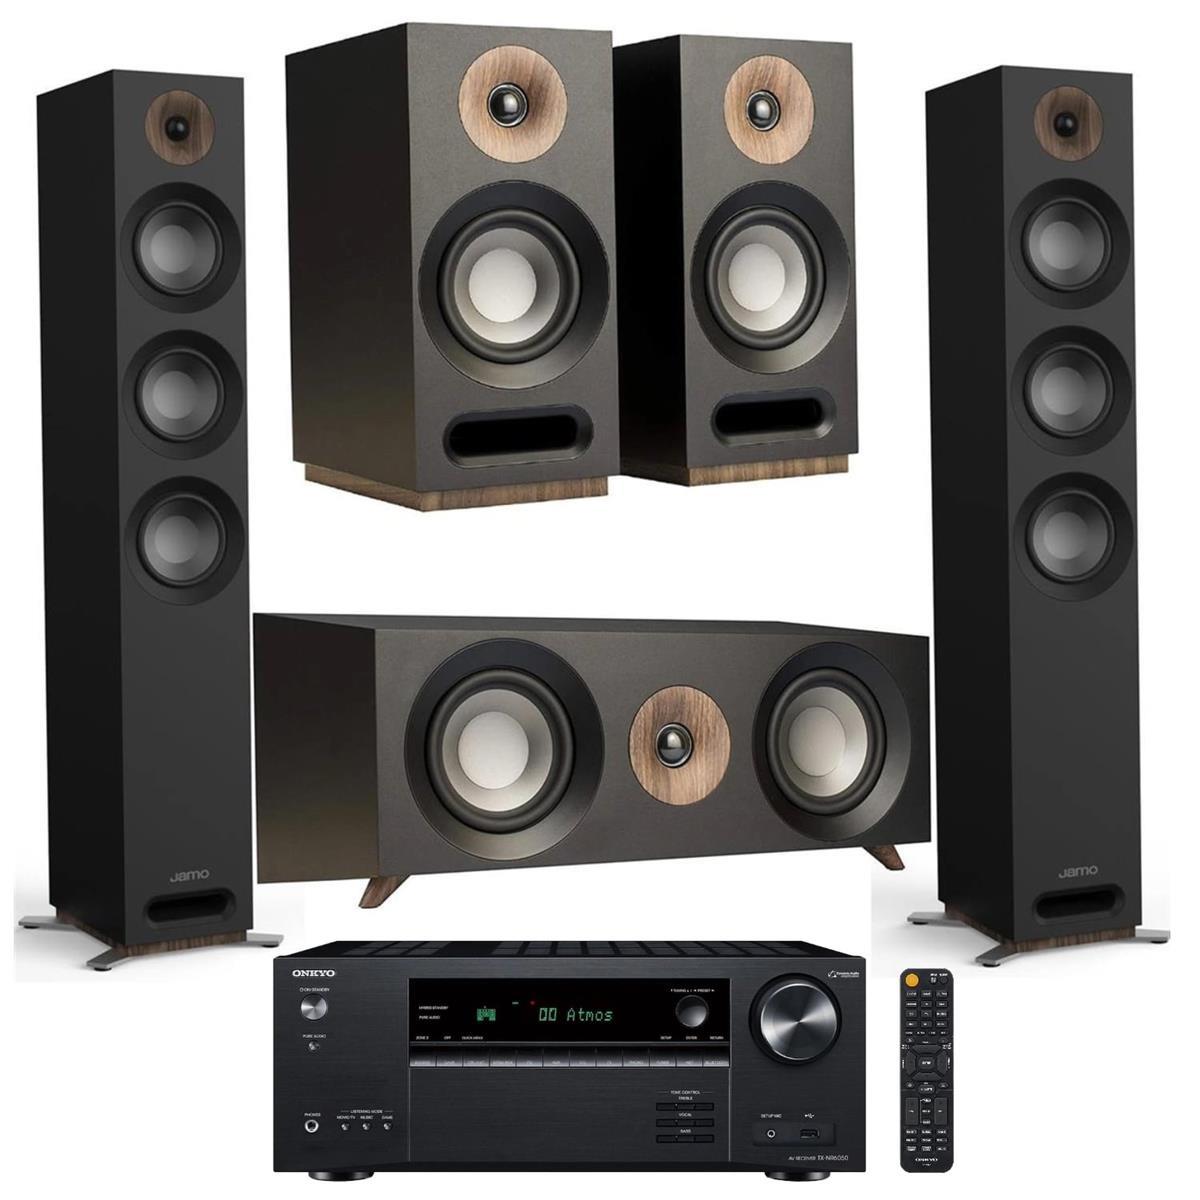 Jamo S 809 5.0 Home Theater System for $599 Shipped